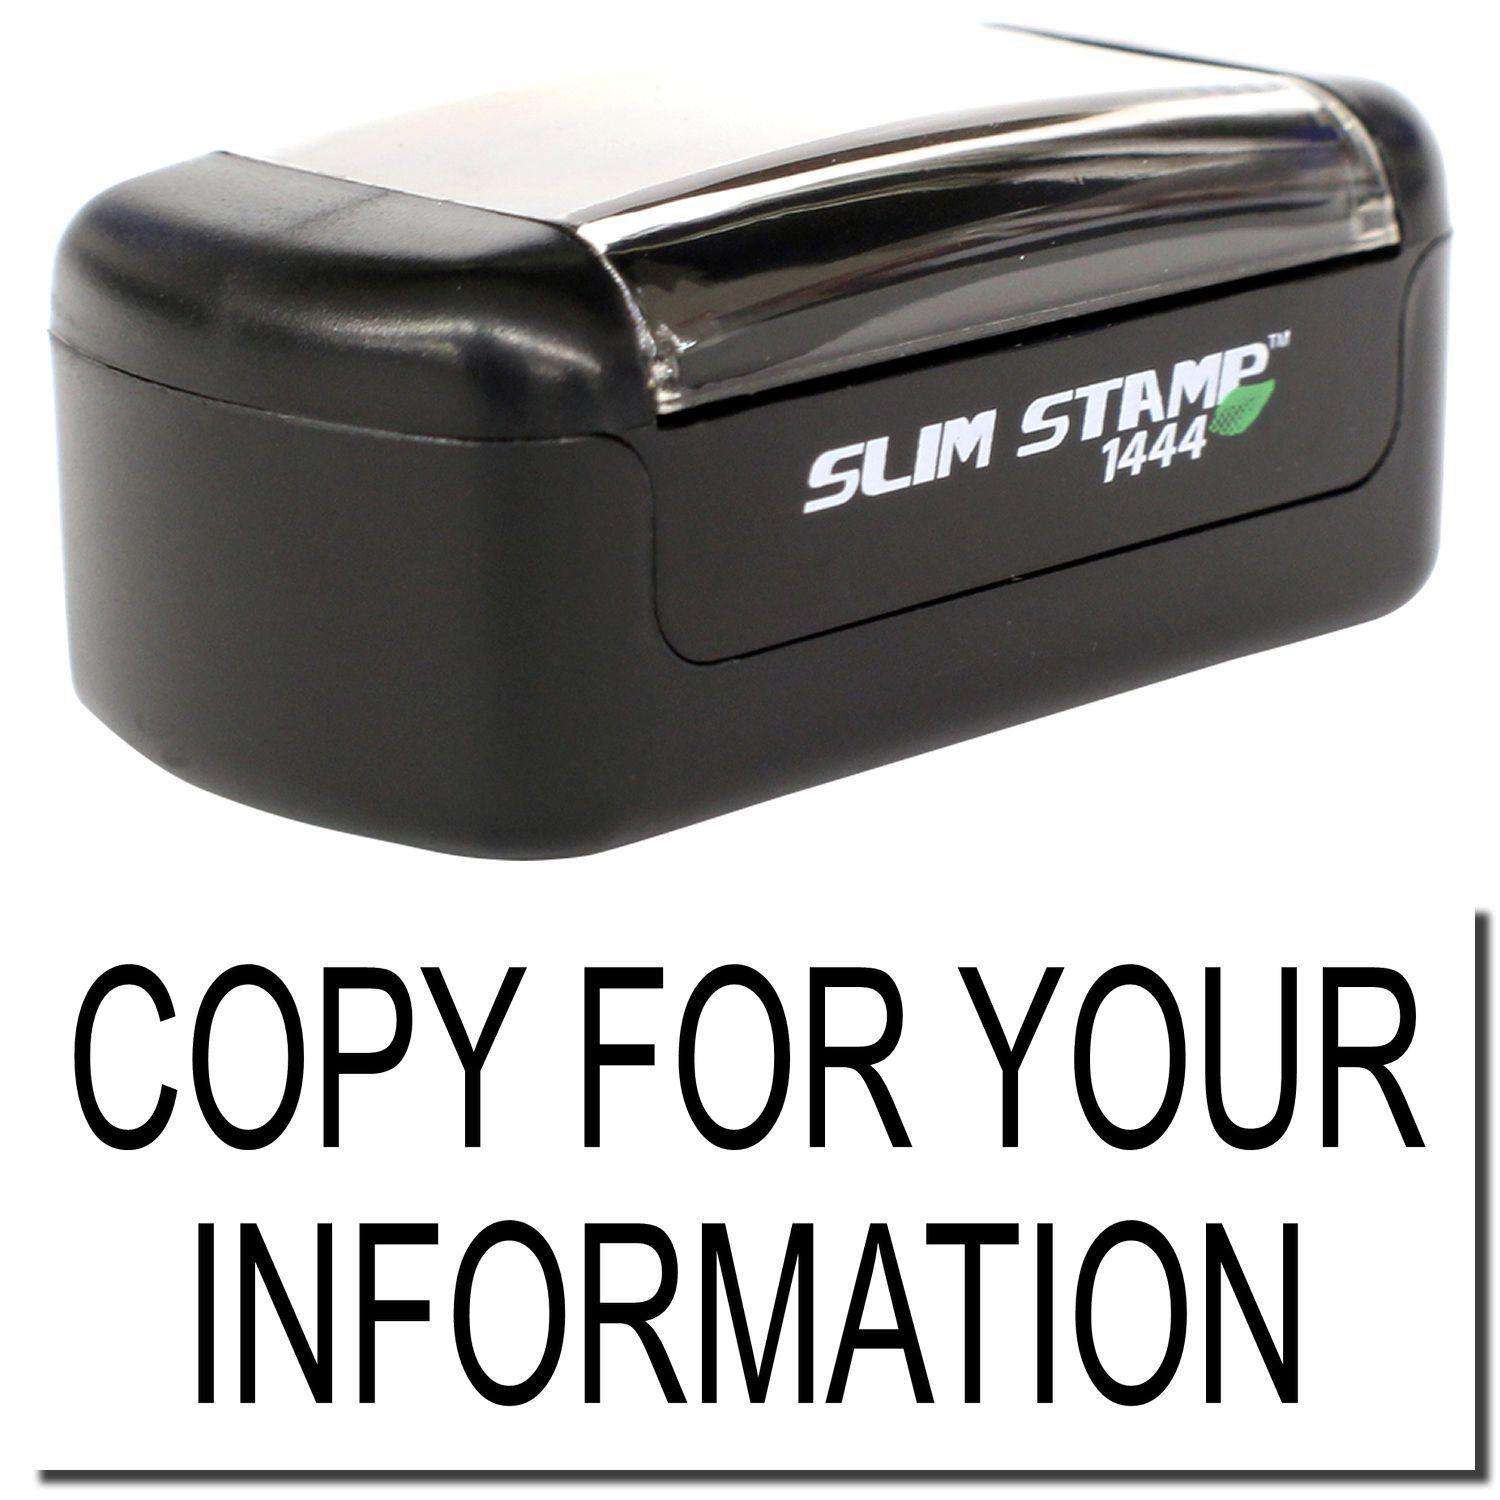 A stock office pre-inked stamp with a stamped image showing how the text "COPY FOR YOUR INFORMATION" is displayed after stamping.